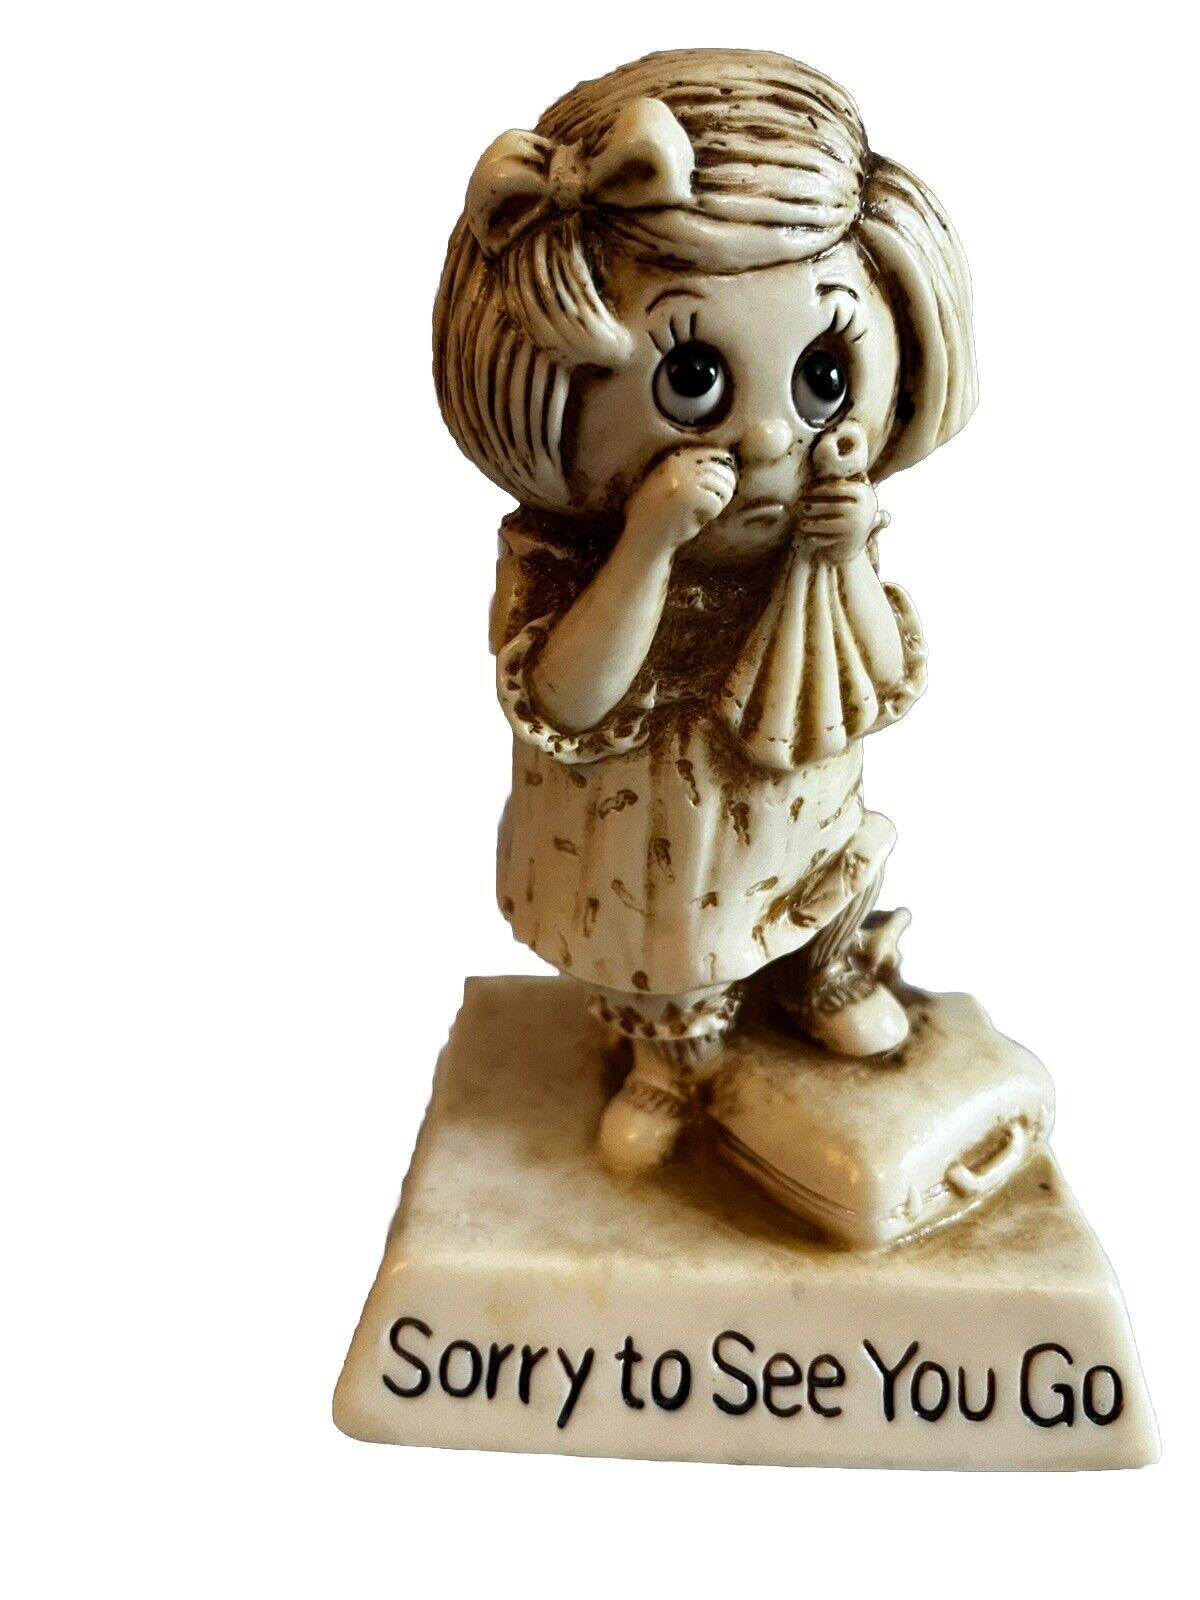 1975 Russ Berries & Co Figurine / Sorry To See You Go / 5” Height 